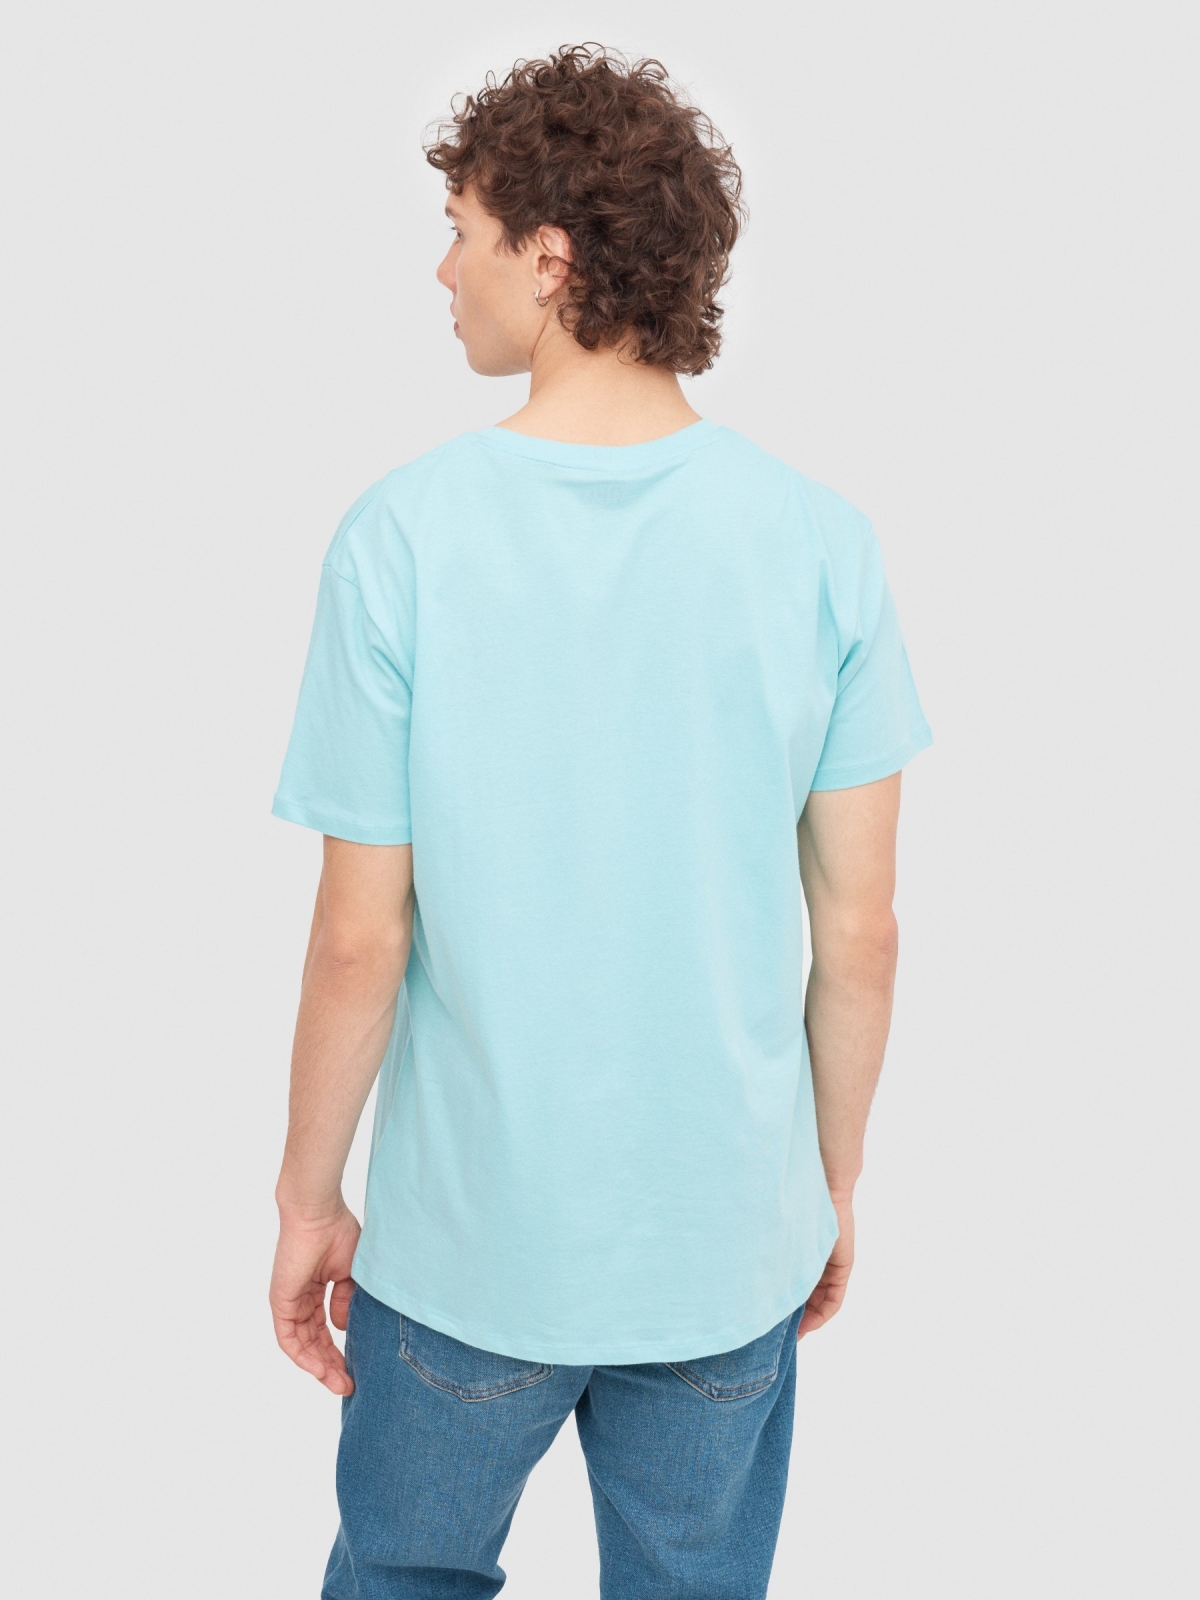 One Piece Film T-Shirt light blue middle back view